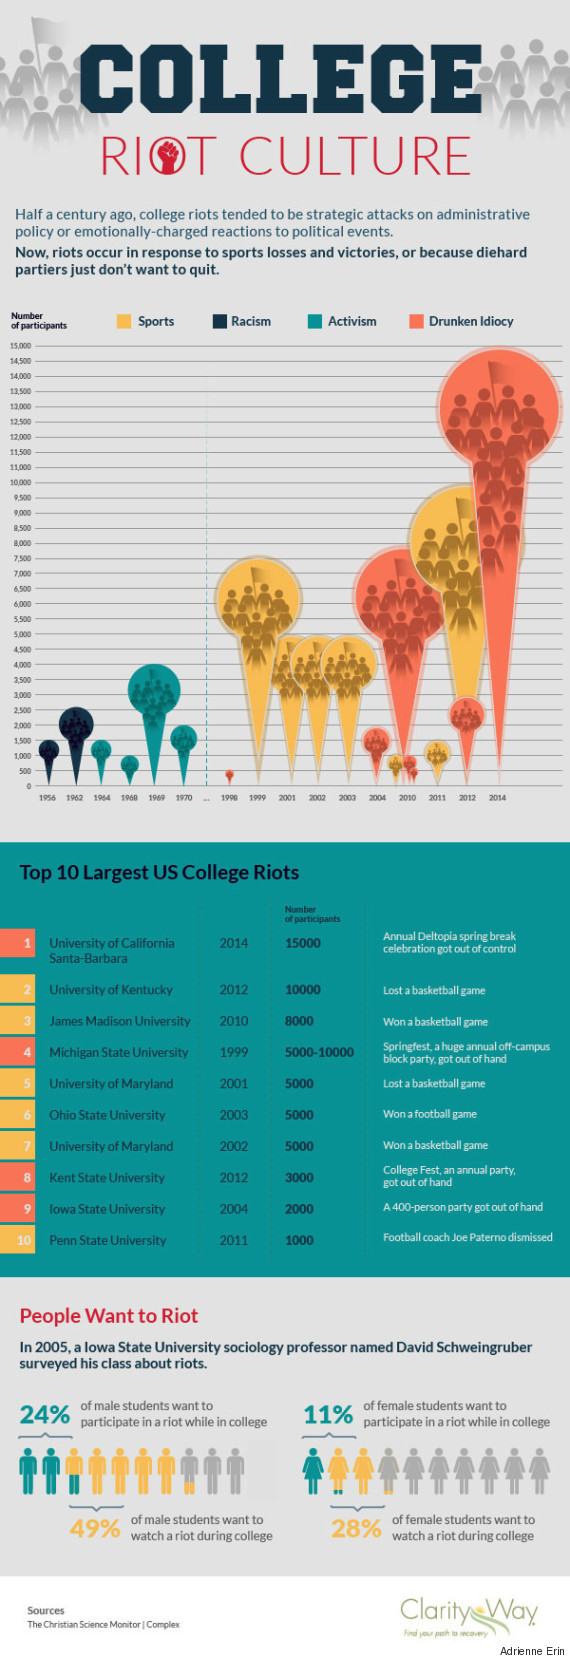 Far More College Students Riot Due To ‘Drunken Idiocy’ Than For Activism (INFOGRAPHIC)